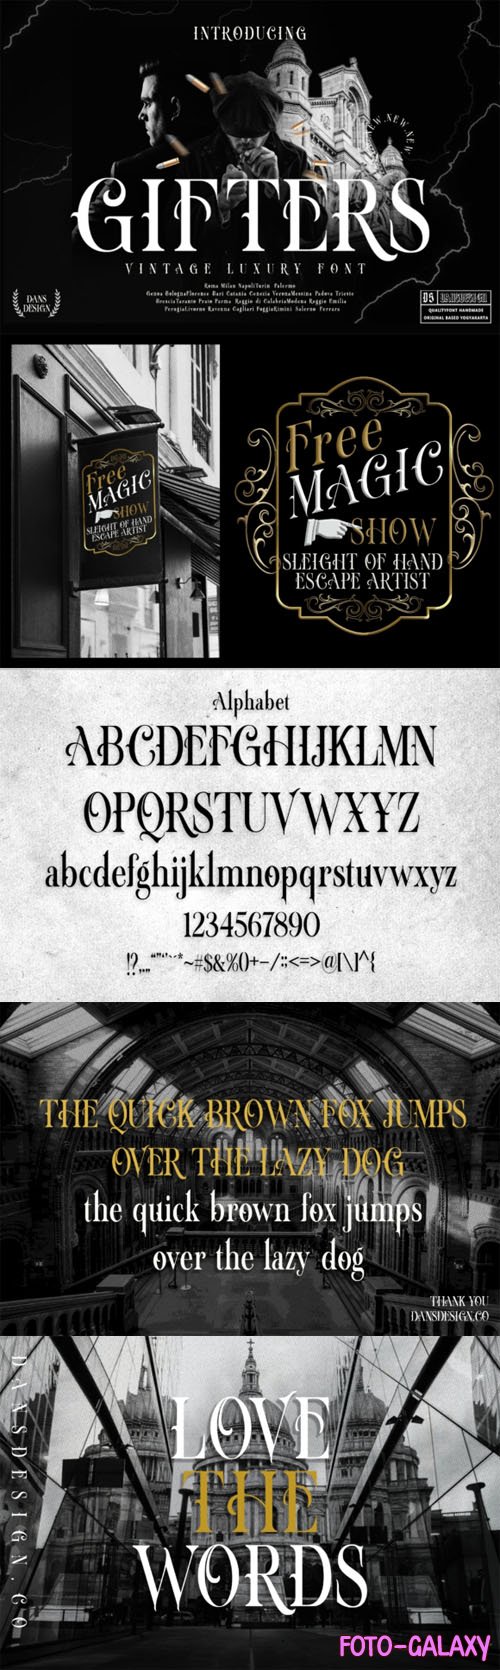 Gifters - Vintage Luxury Font